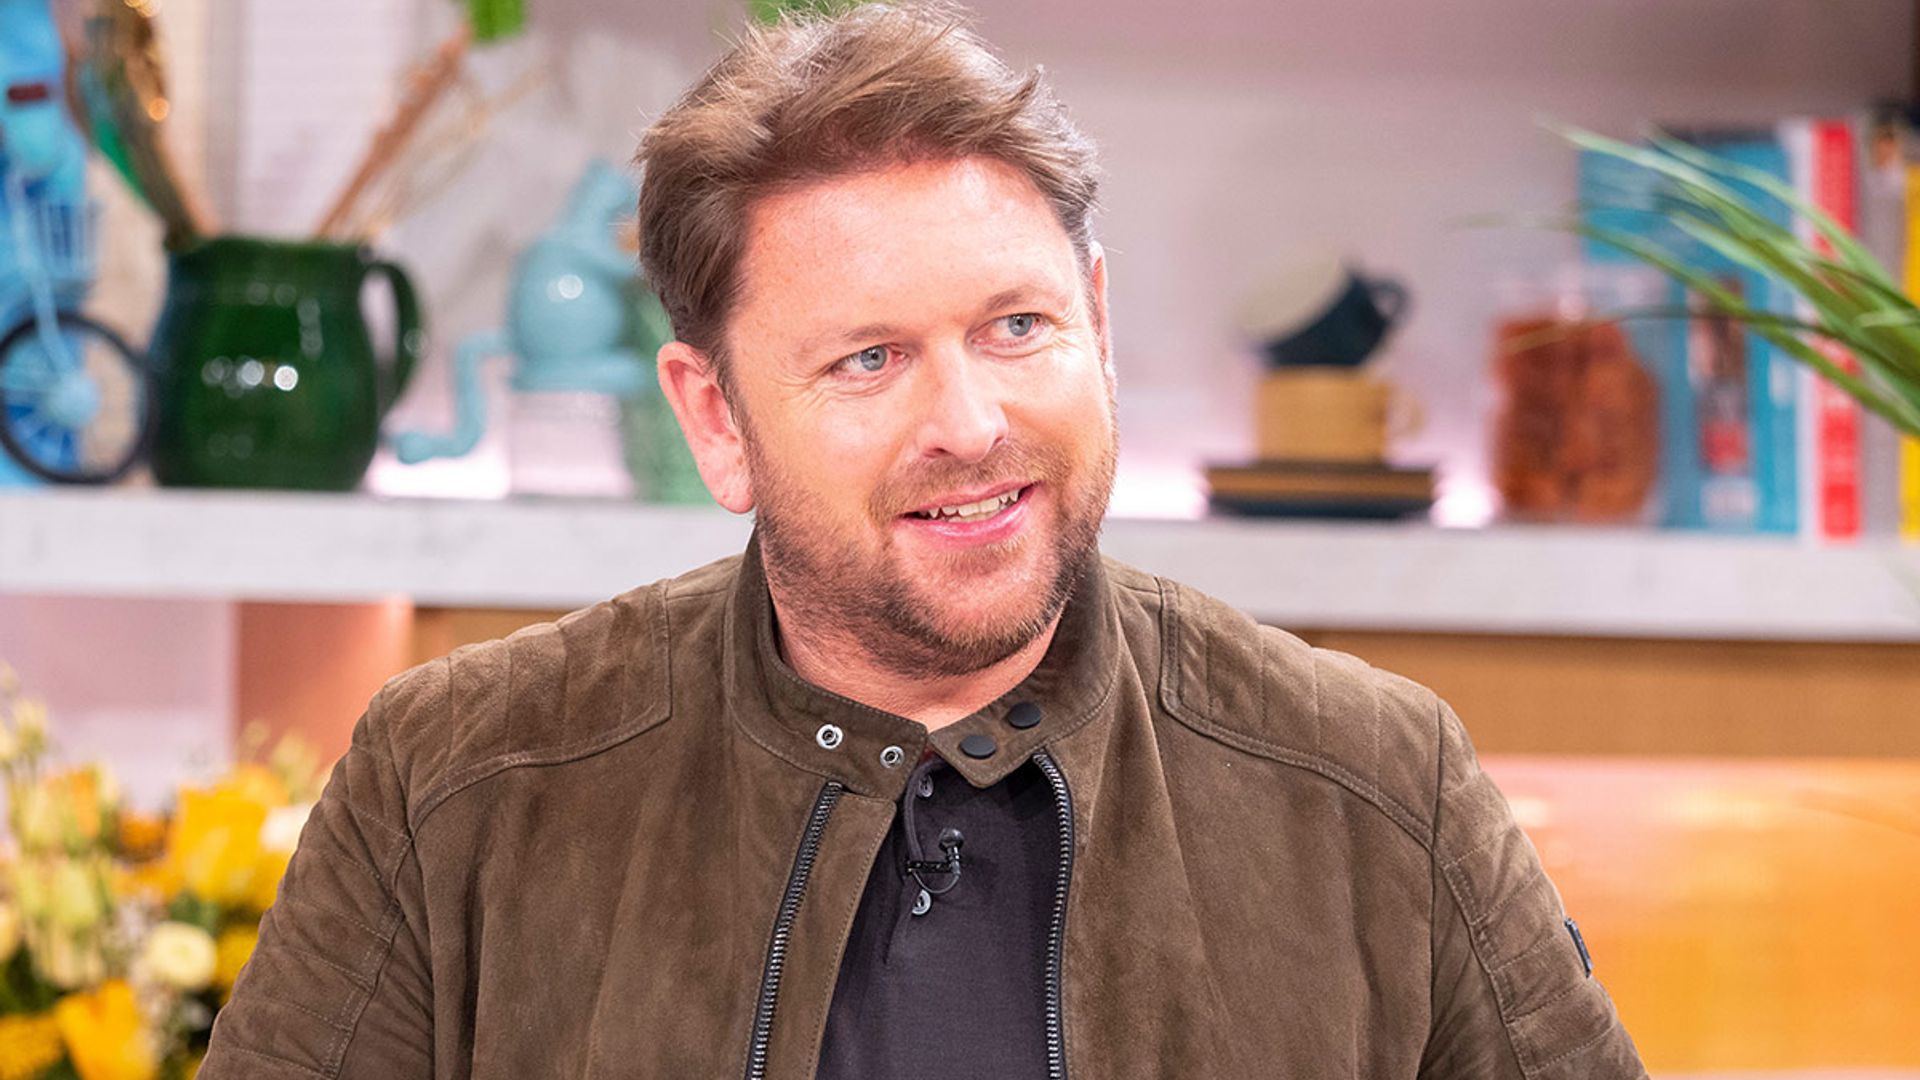 James Martin likened to Prince William in must-see throwback snap